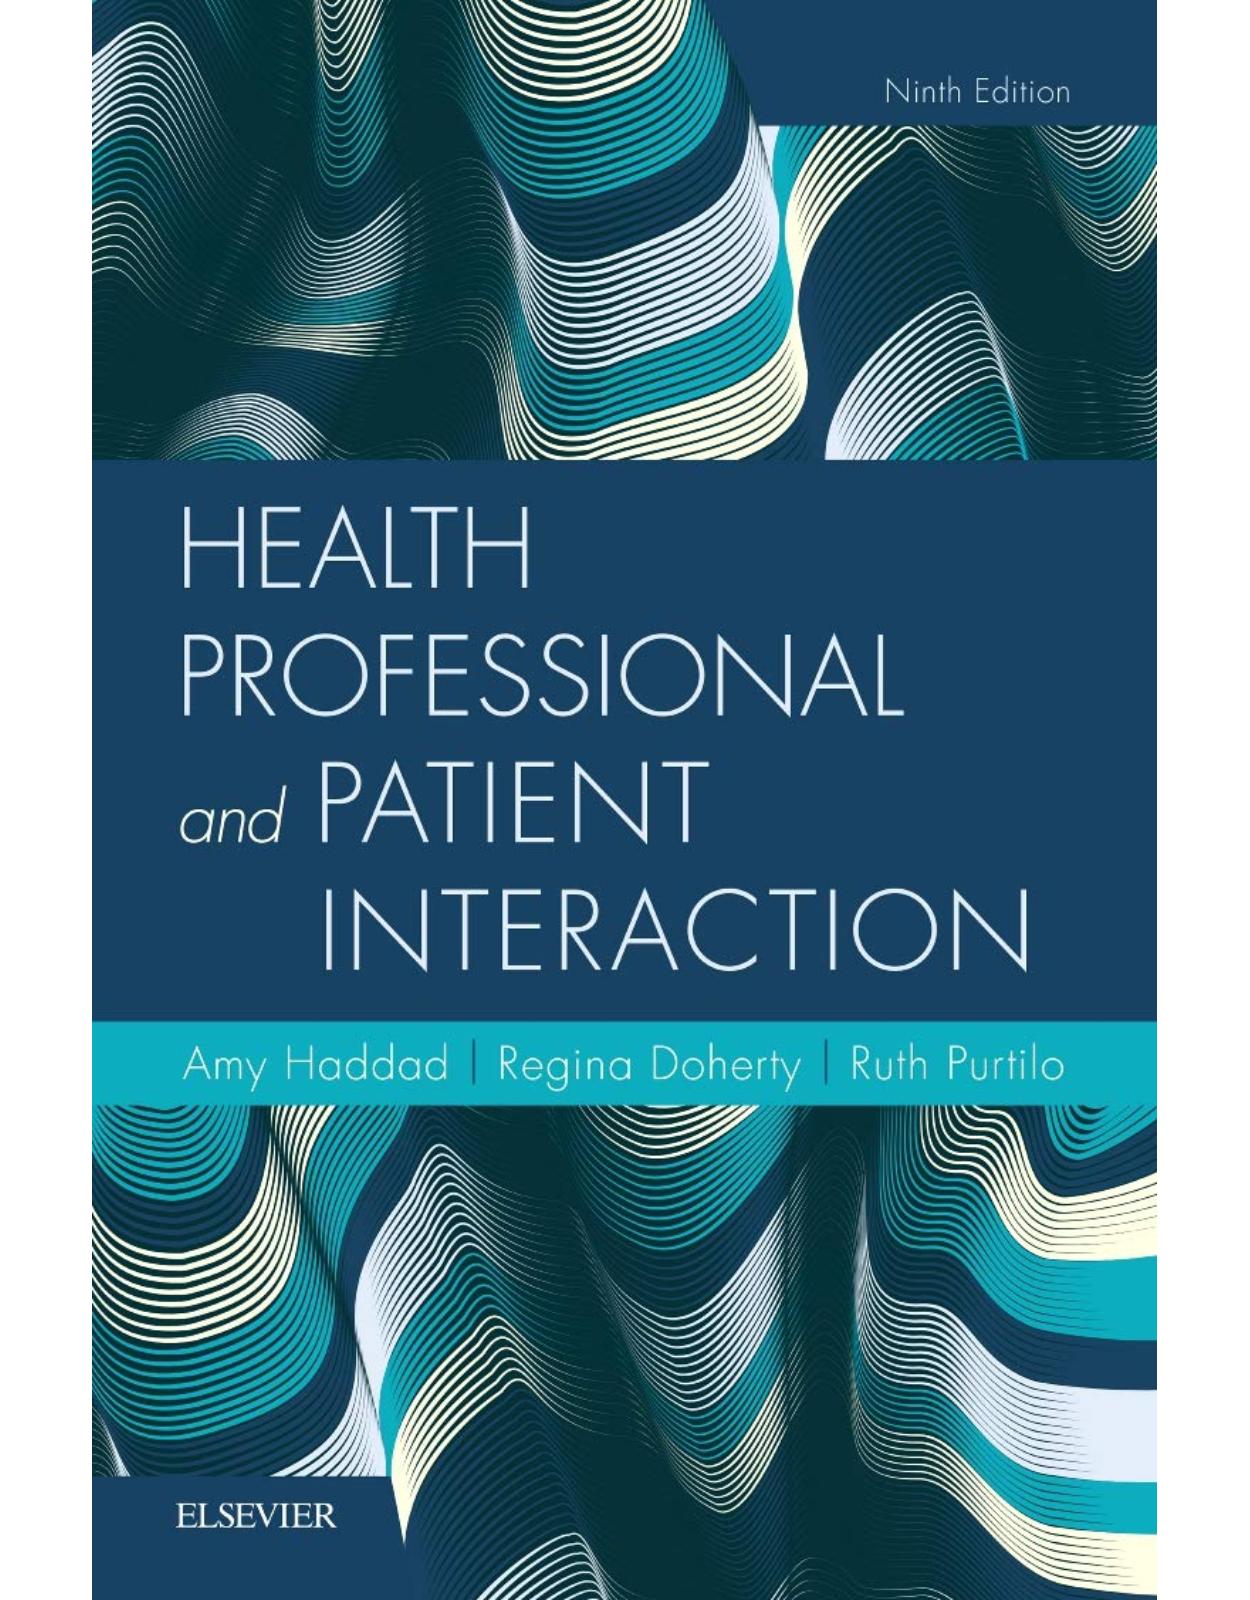 Health Professional and Patient Interaction, 9e